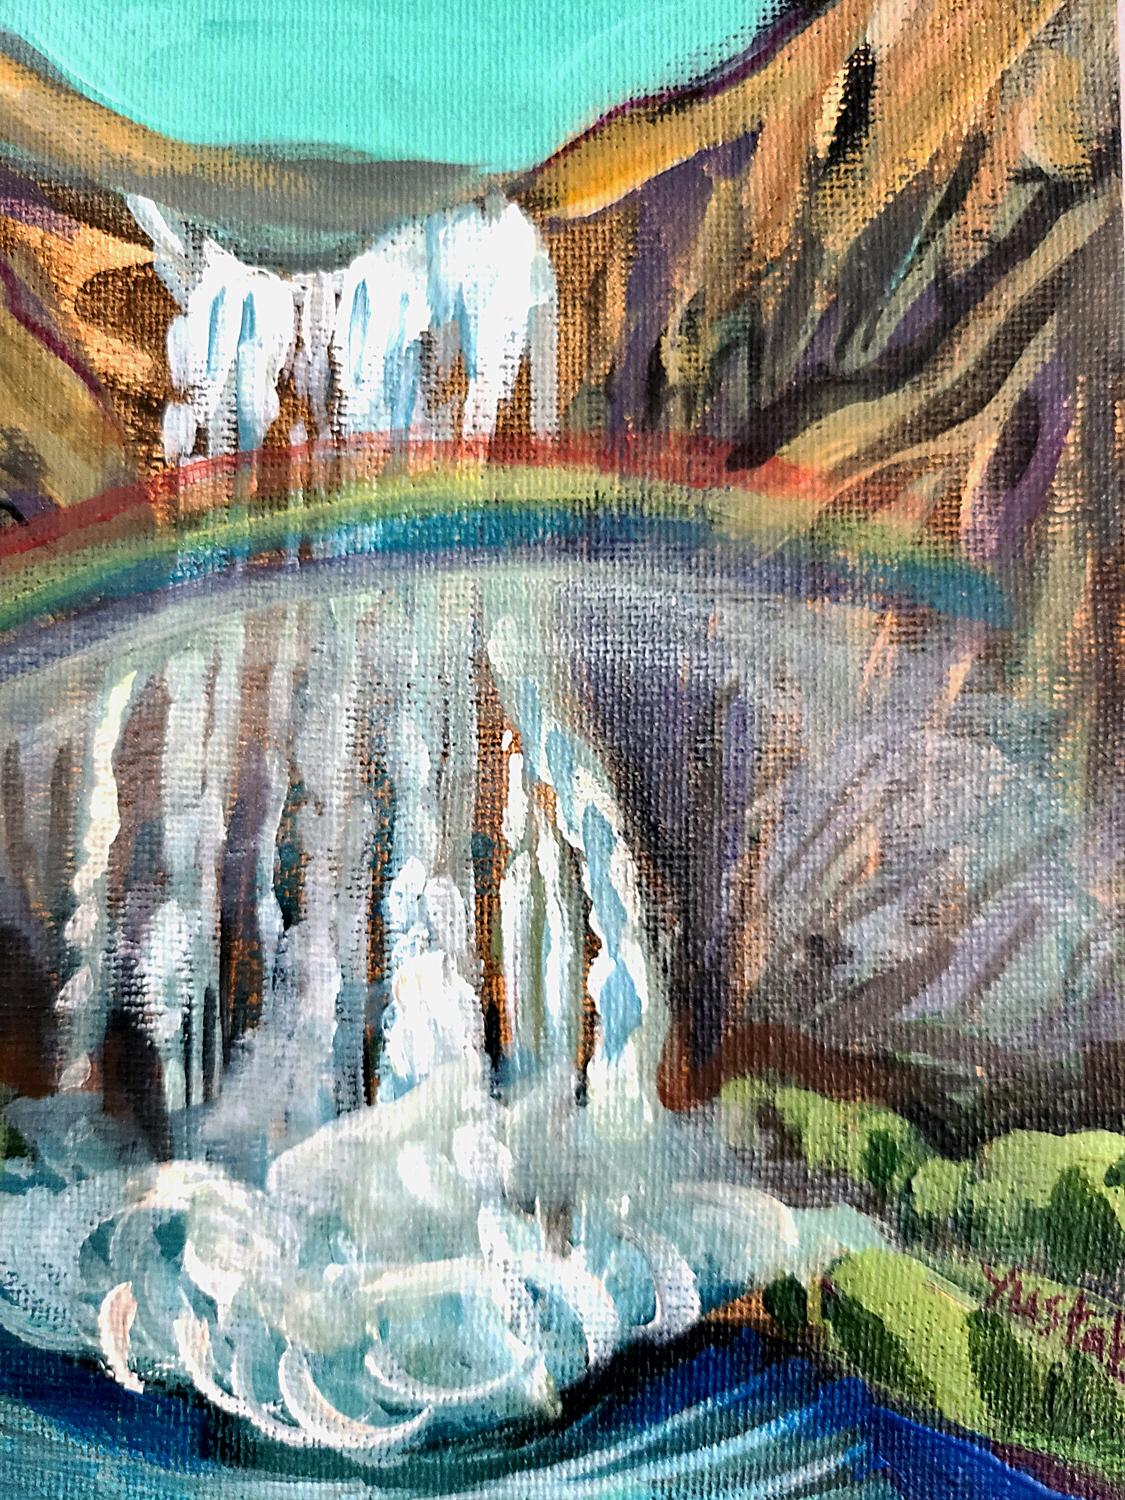 <p>Artist Comments<br>In primitivism style, artist Kira Yustak presents a majestic view of the jungle. She draws inspiration from natural phenomena occurring in nature. A prismatic rainbow emerges from the raging waterfall connecting to the sun's